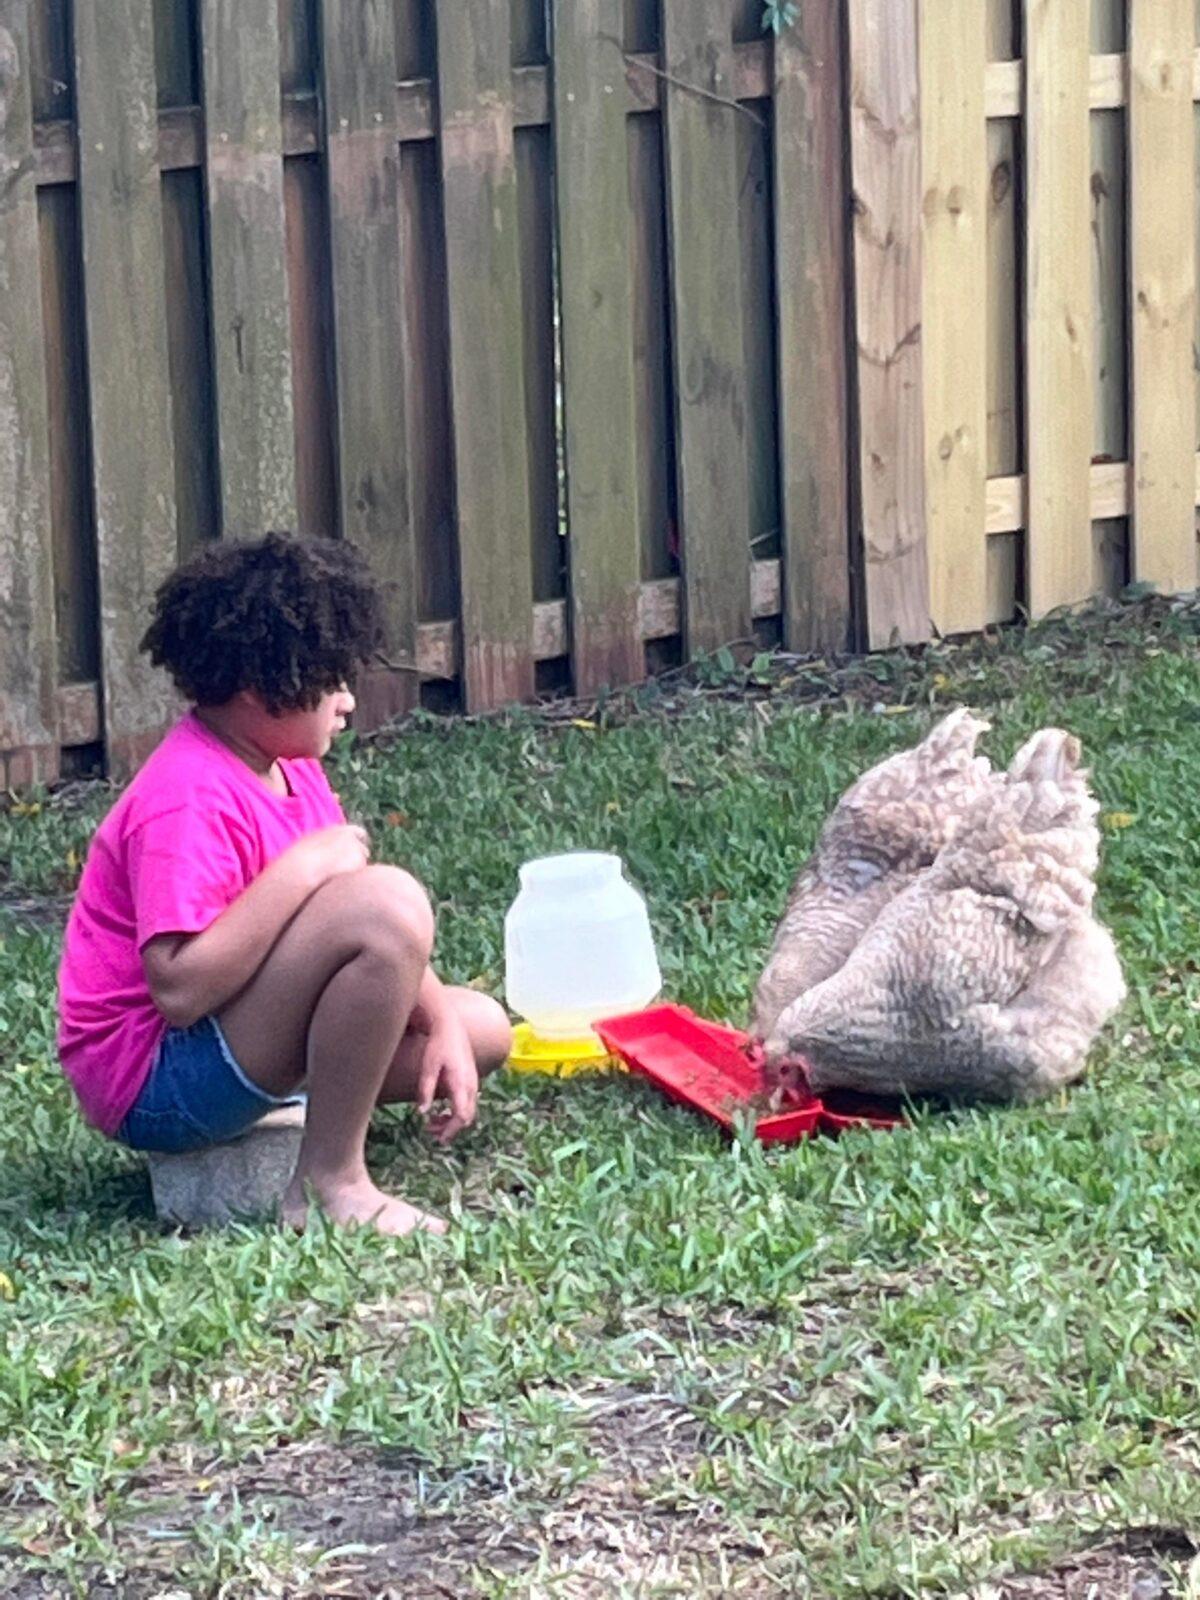 Kathy Beyer's adopted daughter, Elysia, who had been severely traumatized in the foster care system, finds calm and peace when she's with her chickens. (Courtesy of Kathy Beyer)